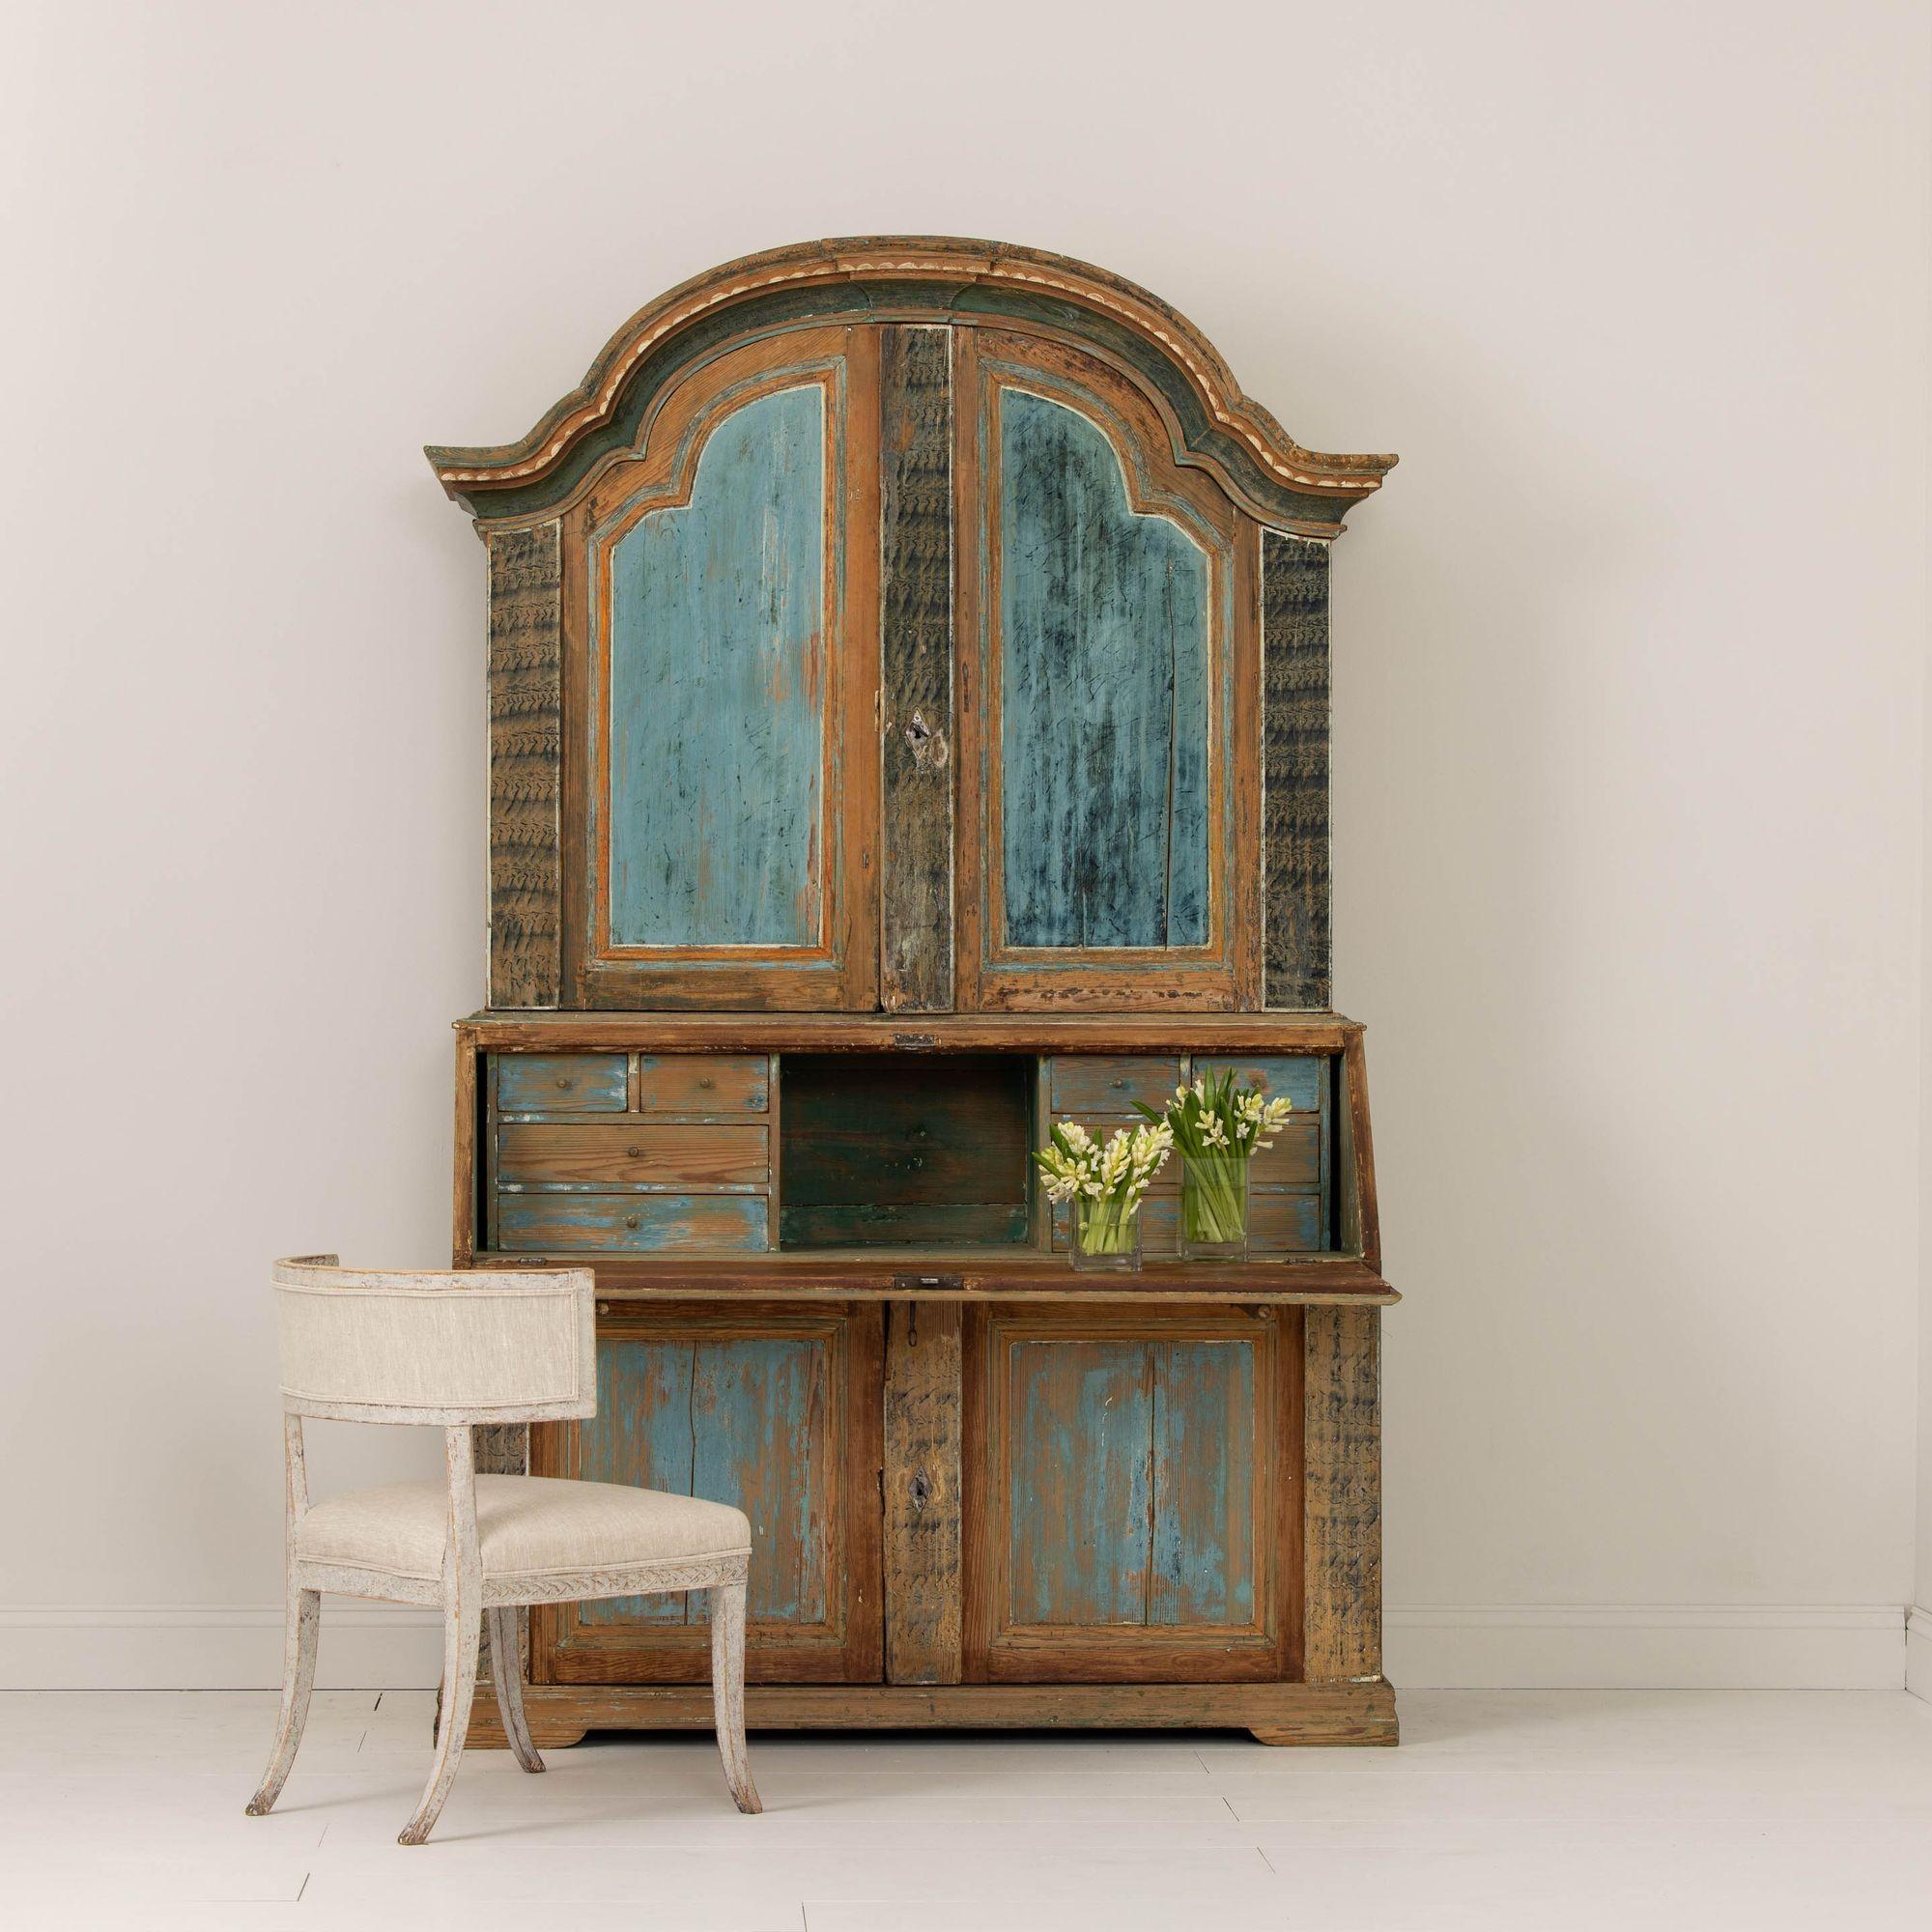 A rare, early 19th century Swedish Rococo style slant-front secretary from Fryksdalen in Värmland with arched cornice, circa 1820. The paint has been hand-scraped down to the original, gorgeous paint surface. The slant-front opens to reveal 8